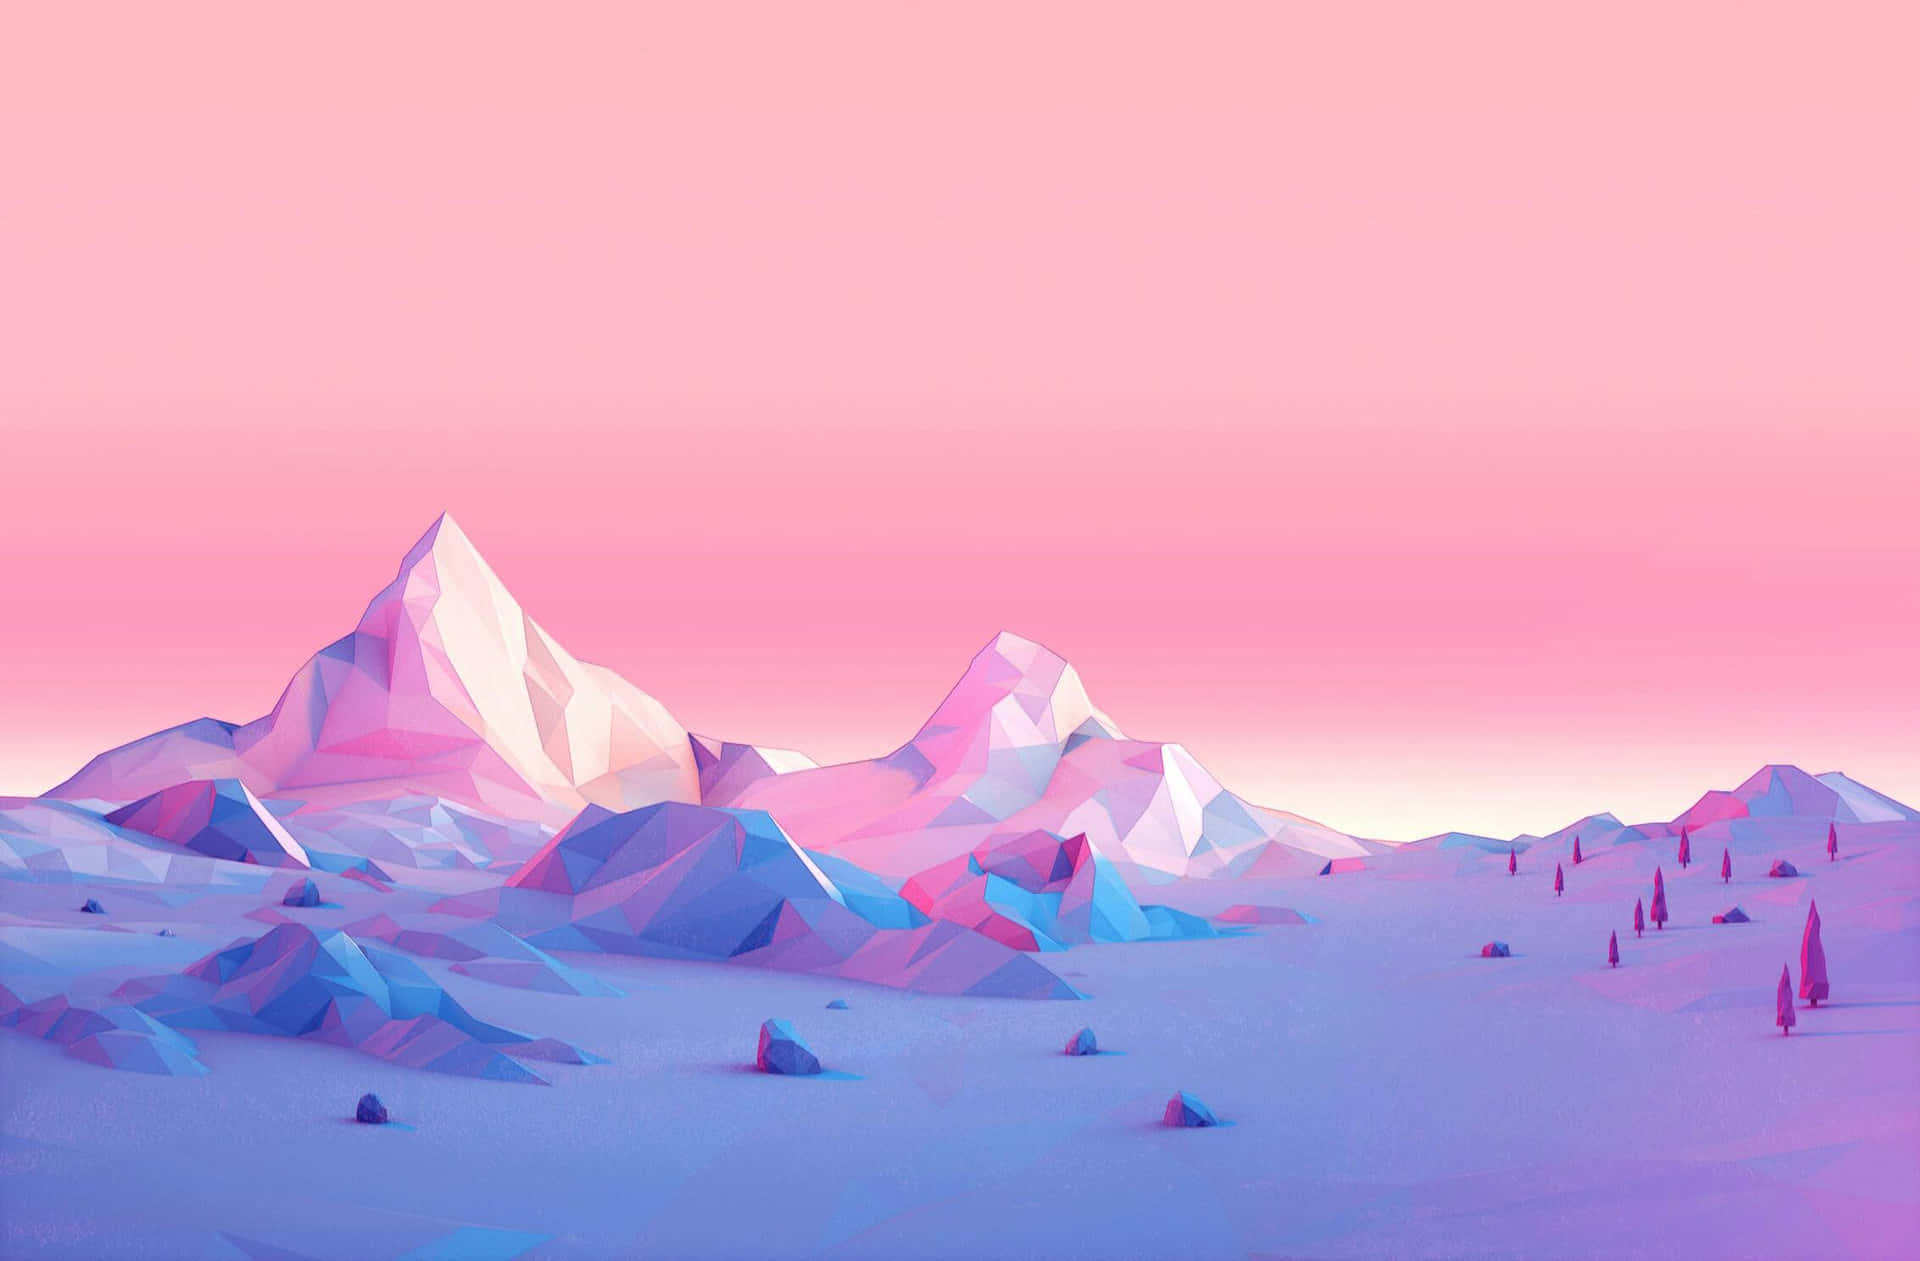 Abstract Pinkand Blue Mountain Landscape Wallpaper